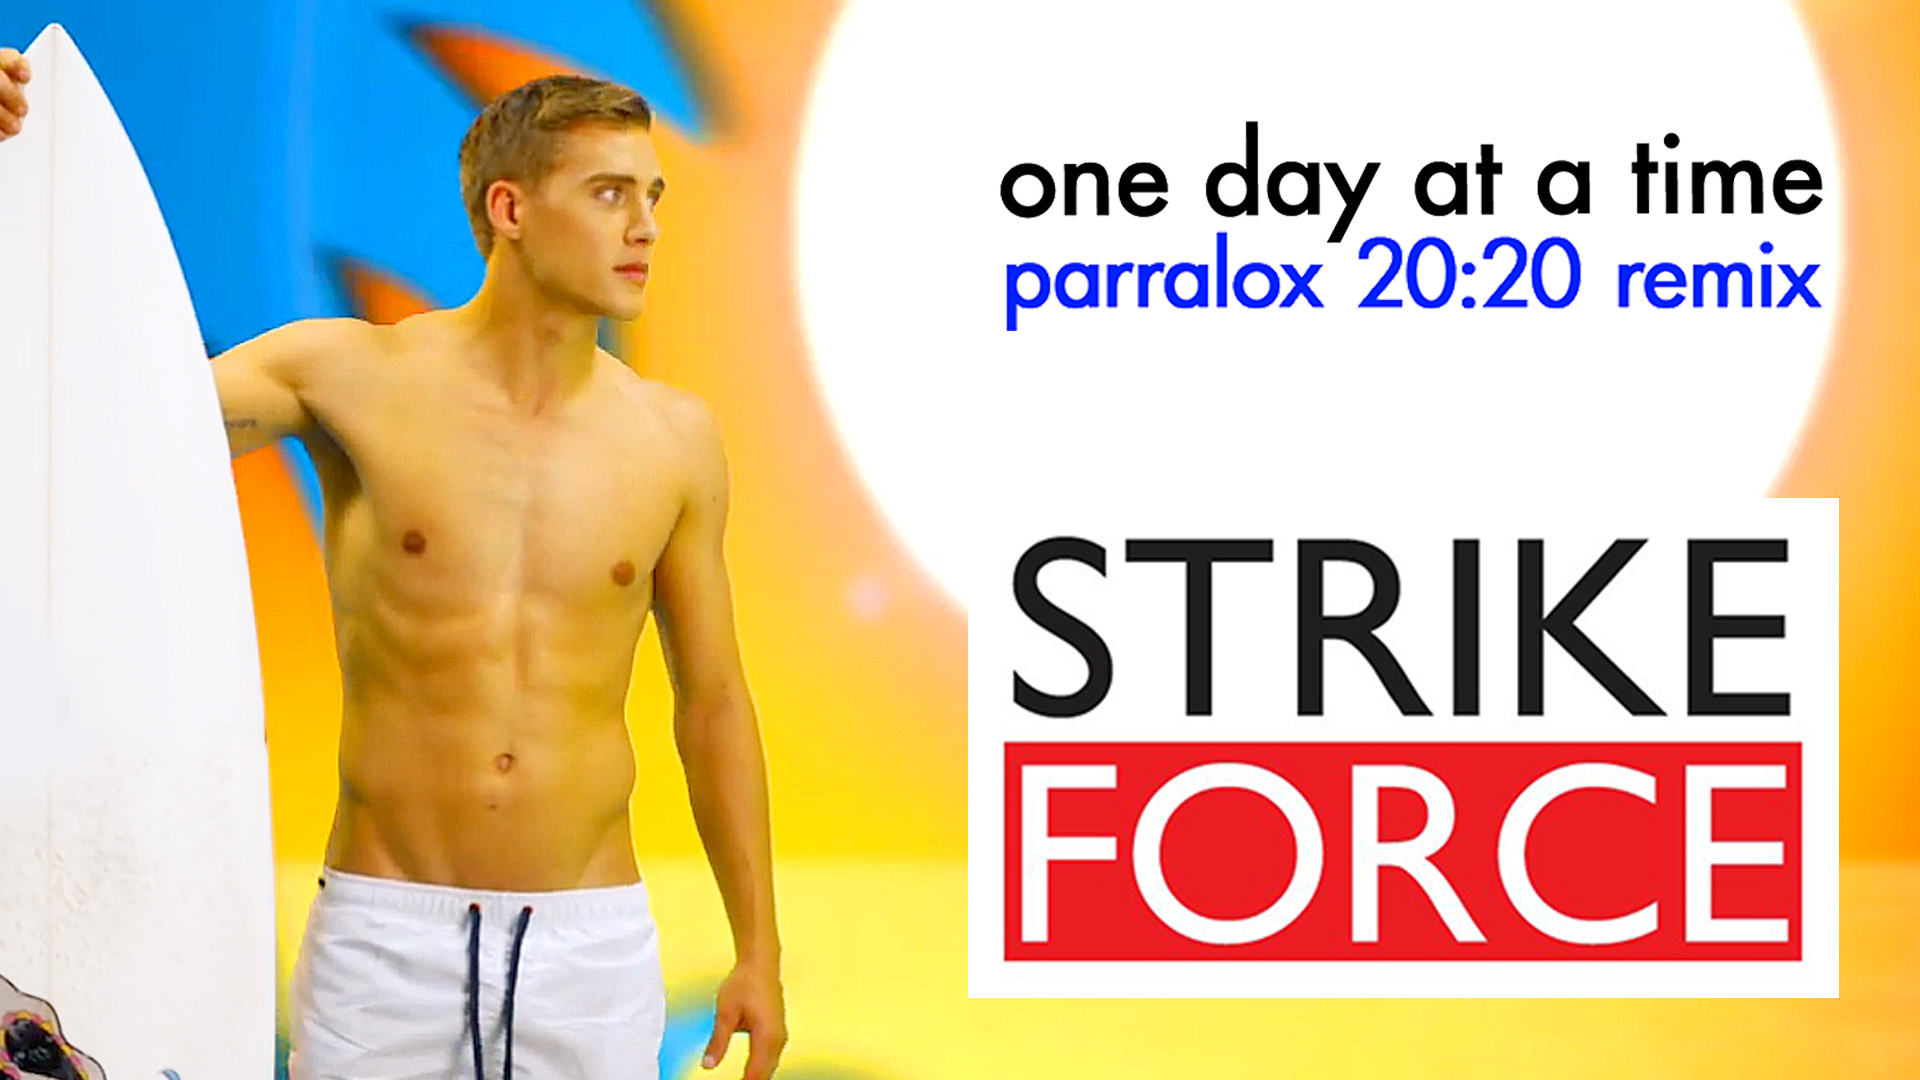 StrikeForce - One Day at a Time (Parralox Remix)